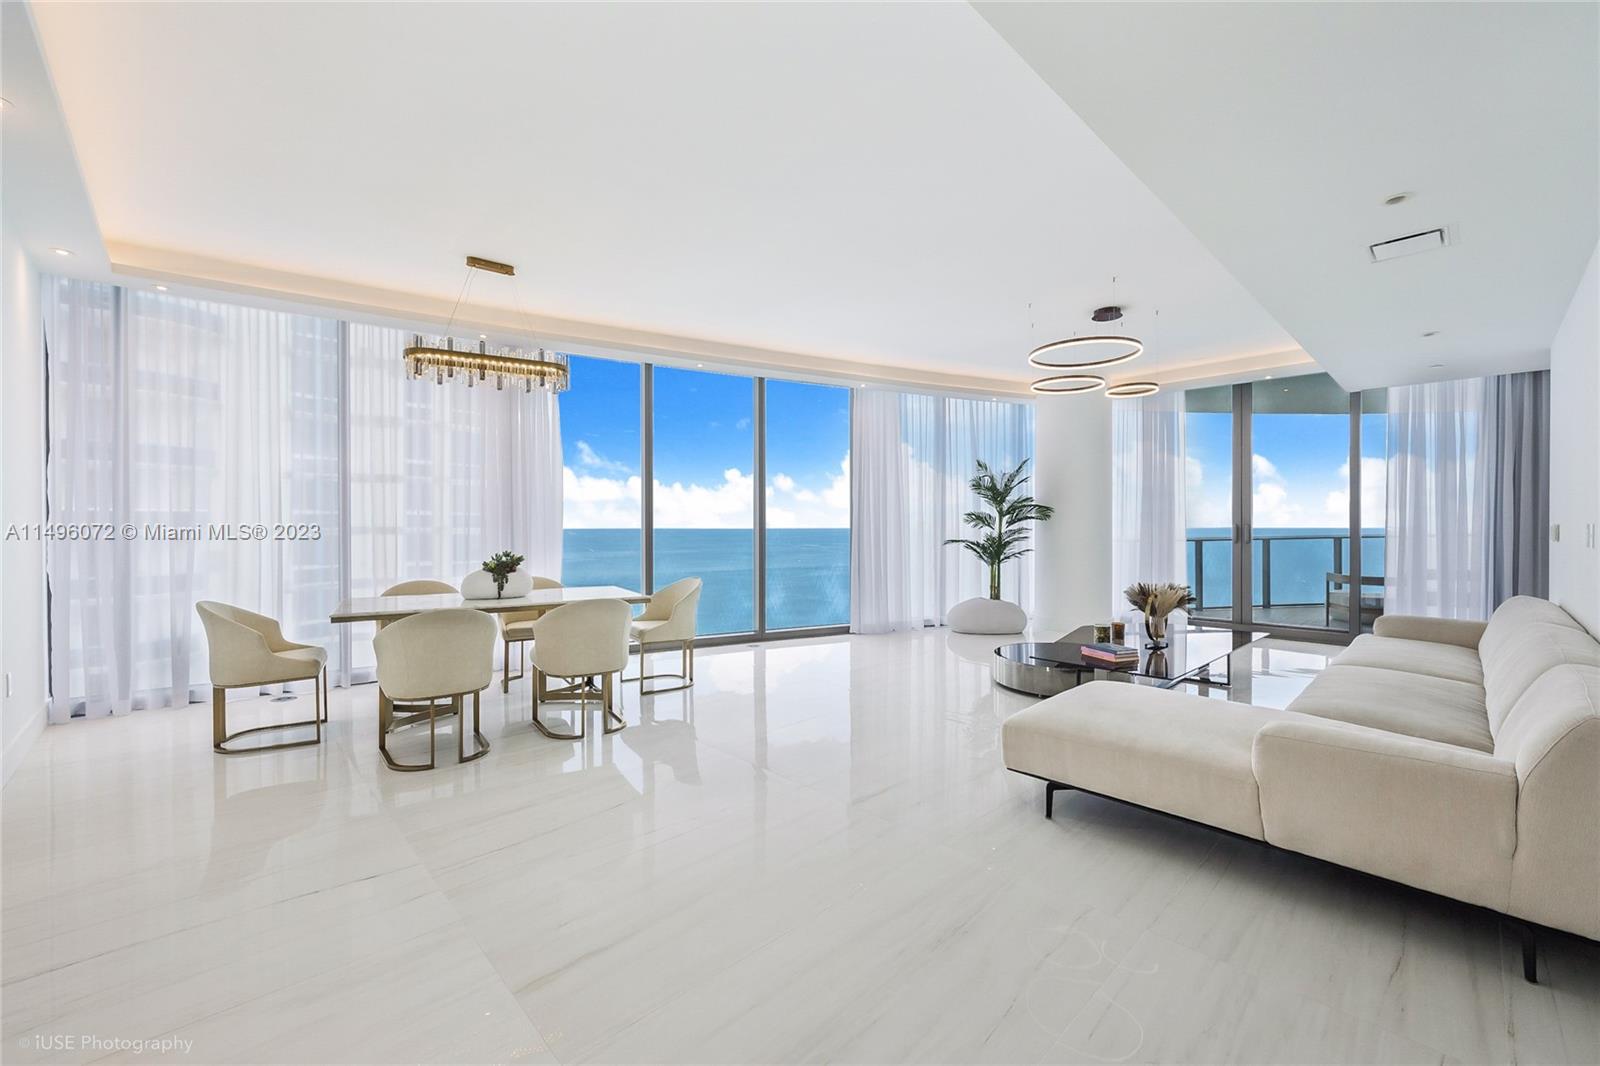 15701 Collins Ave 2901, Sunny Isles Beach, Florida 33160, 3 Bedrooms Bedrooms, ,4 BathroomsBathrooms,Residentiallease,For Rent,15701 Collins Ave 2901,A11496072